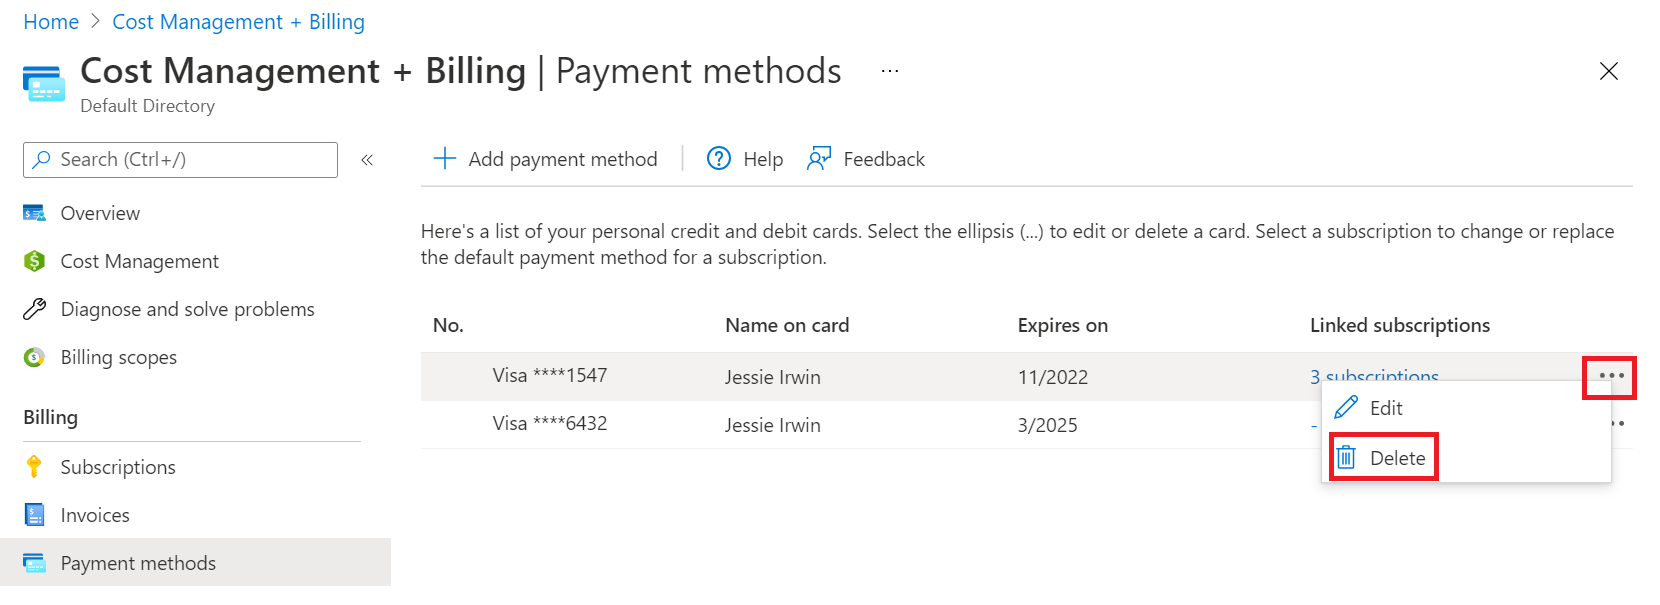 Example screenshot showing a corrective action needed to detach a payment method for MOSP.